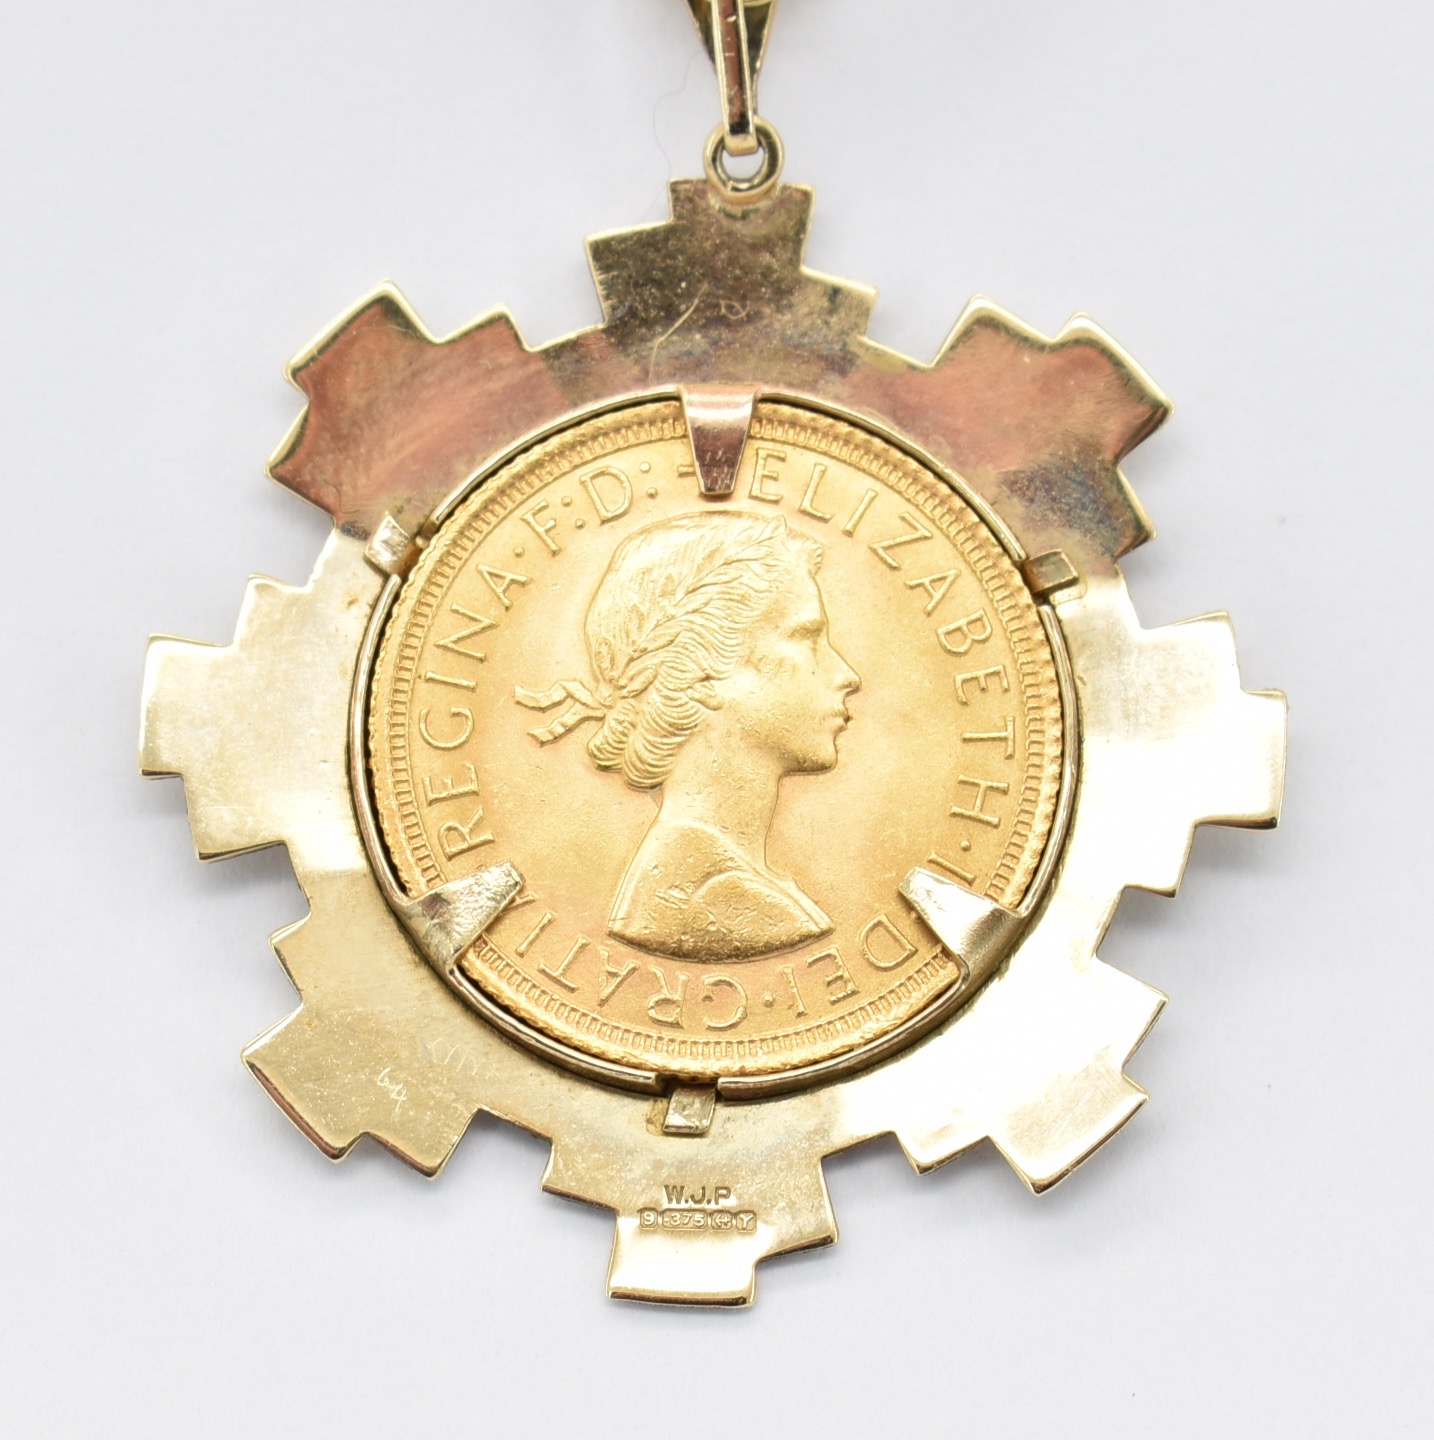 MOUNTED 1965 FULL GOLD SOVEREIGN PENDANT NECKLACE - Image 3 of 5